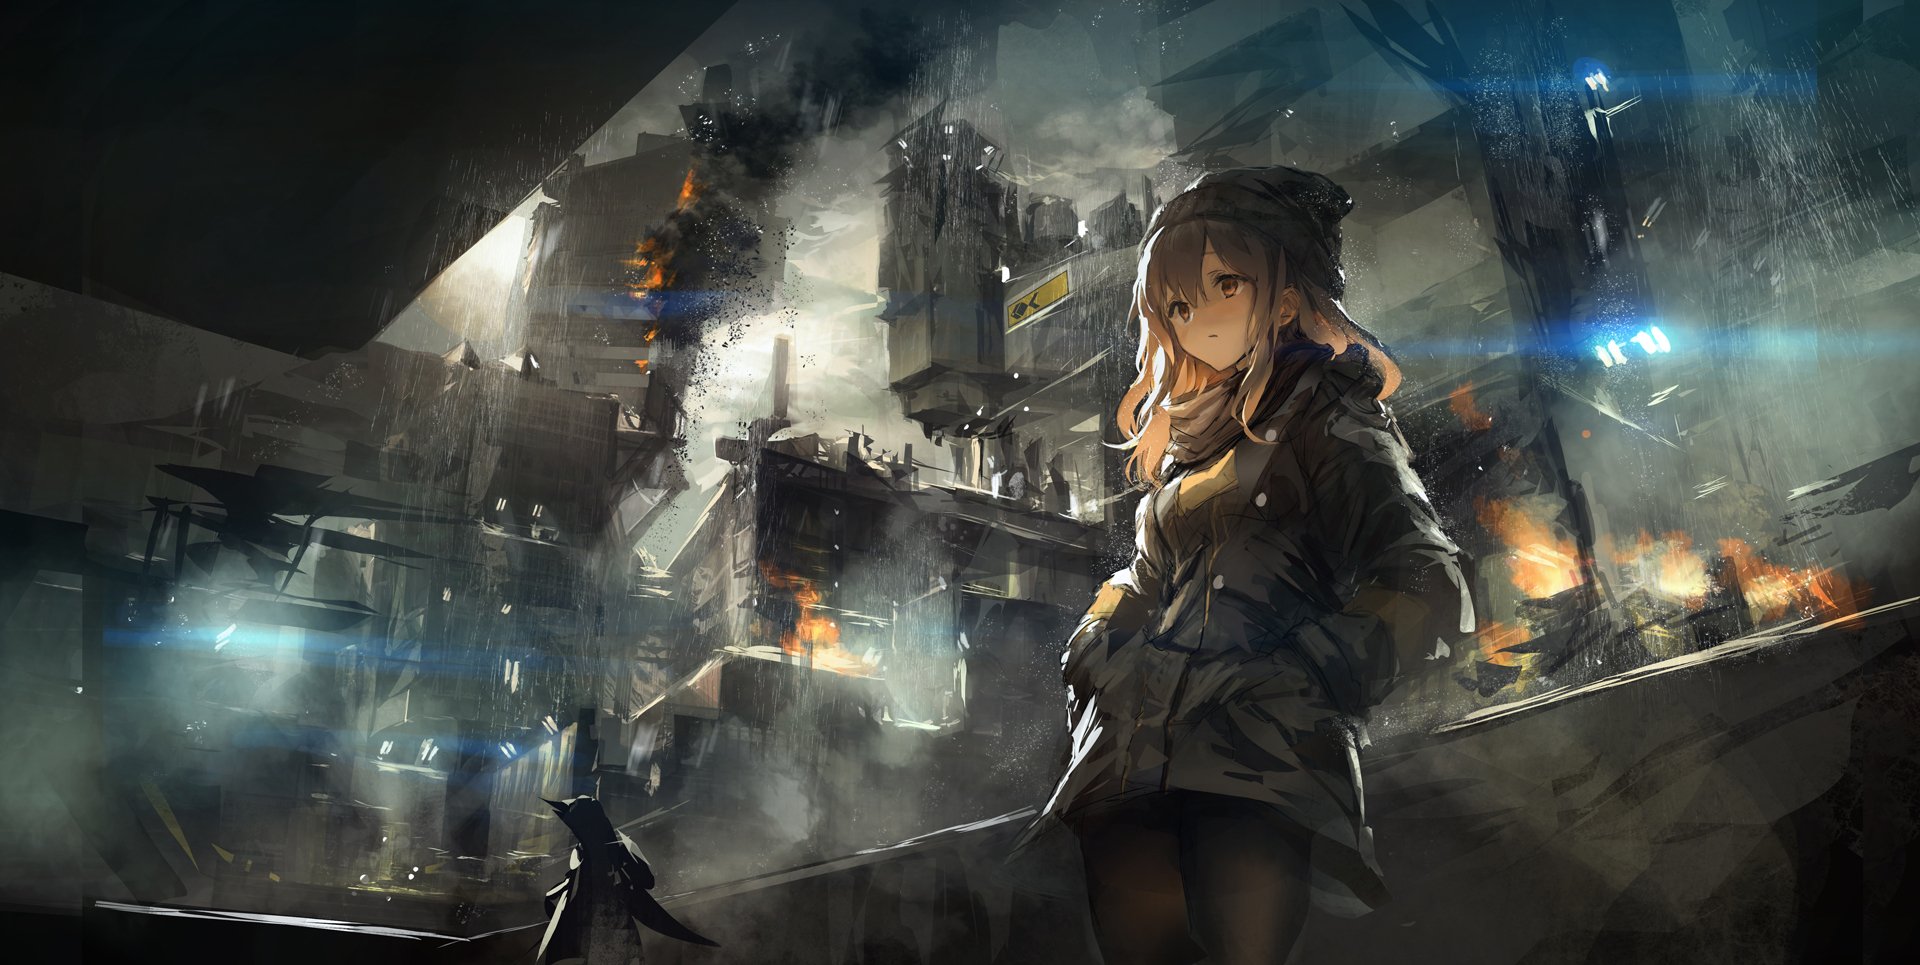 Anime 1920x965 anime anime girls building hat fire destruction blonde _LM7_ city standing women with hats women